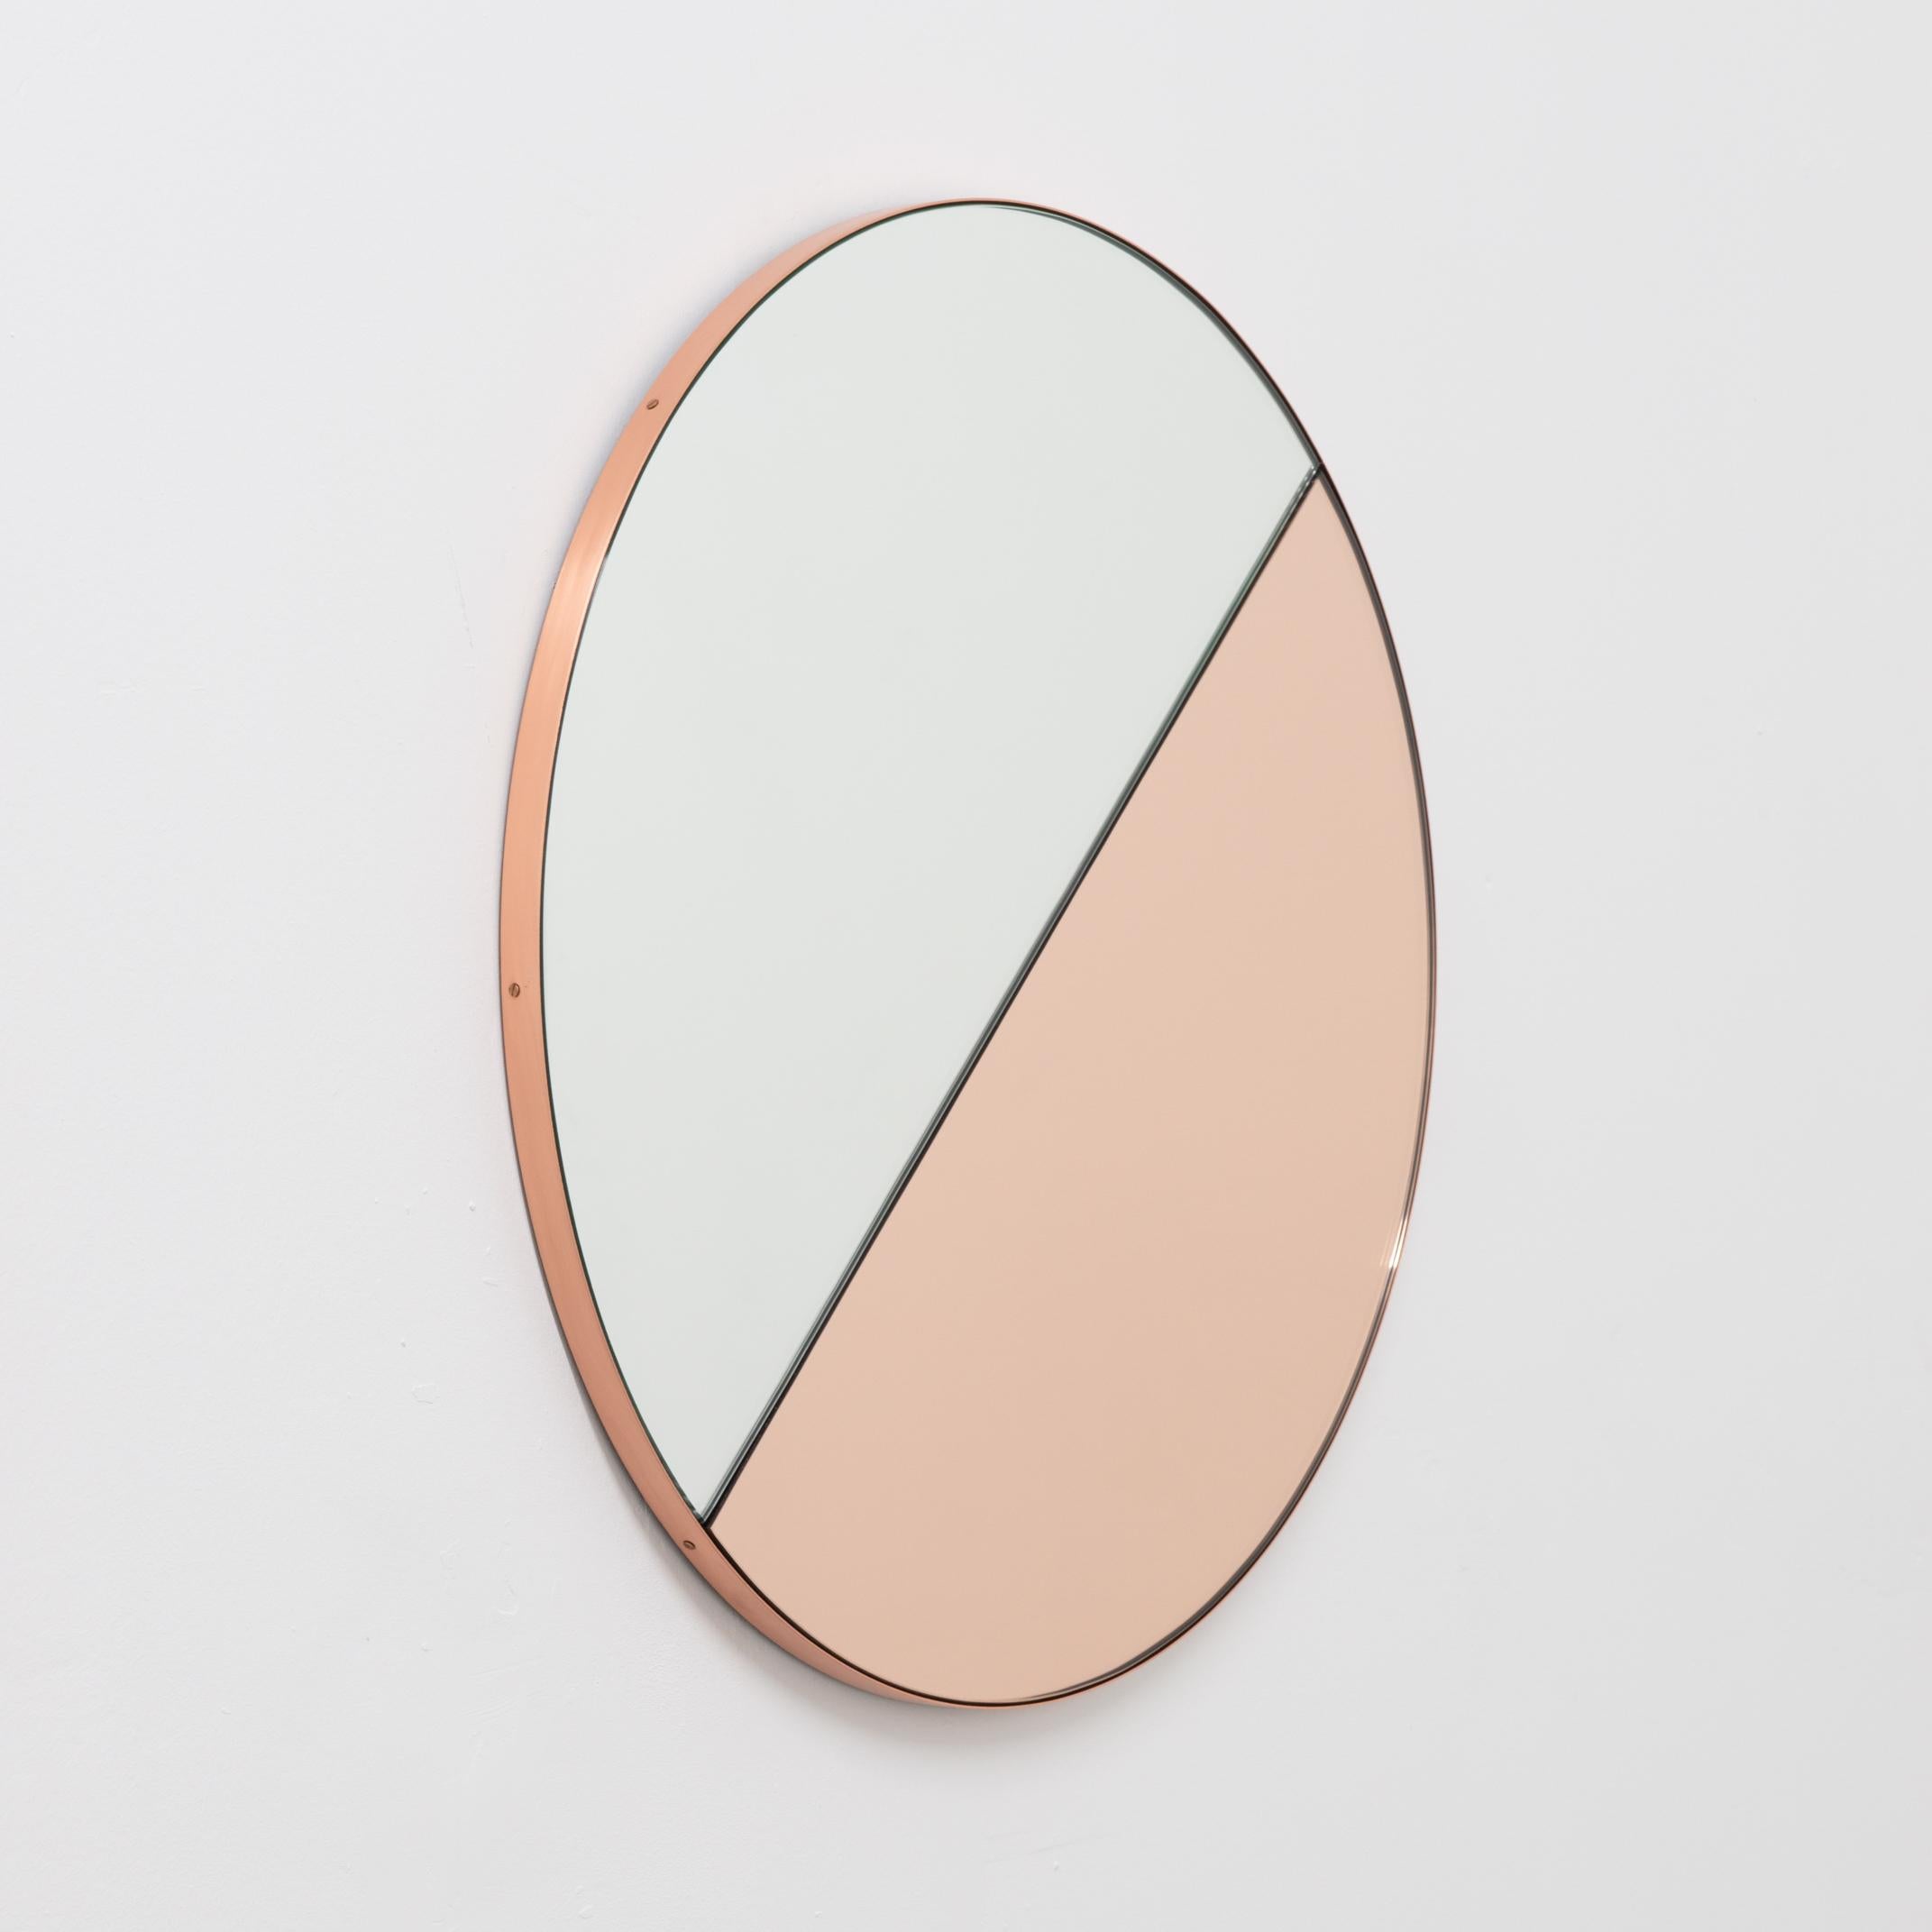 Contemporary Orbis Dualis Mixed Rose Gold and Silver Round Mirror with Copper Frame, Medium For Sale